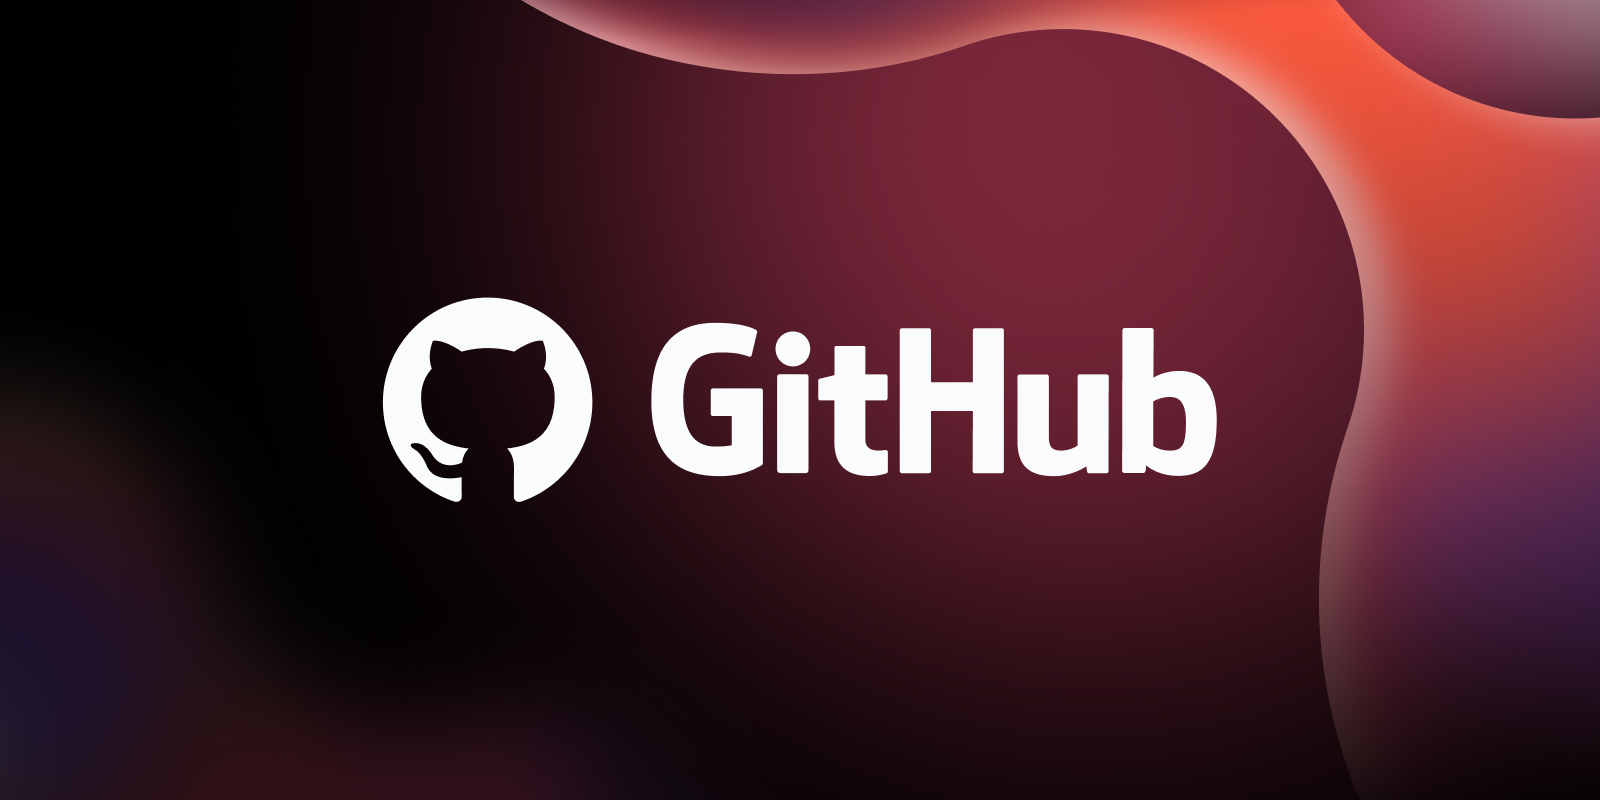 GitHub logo on an abstract background.